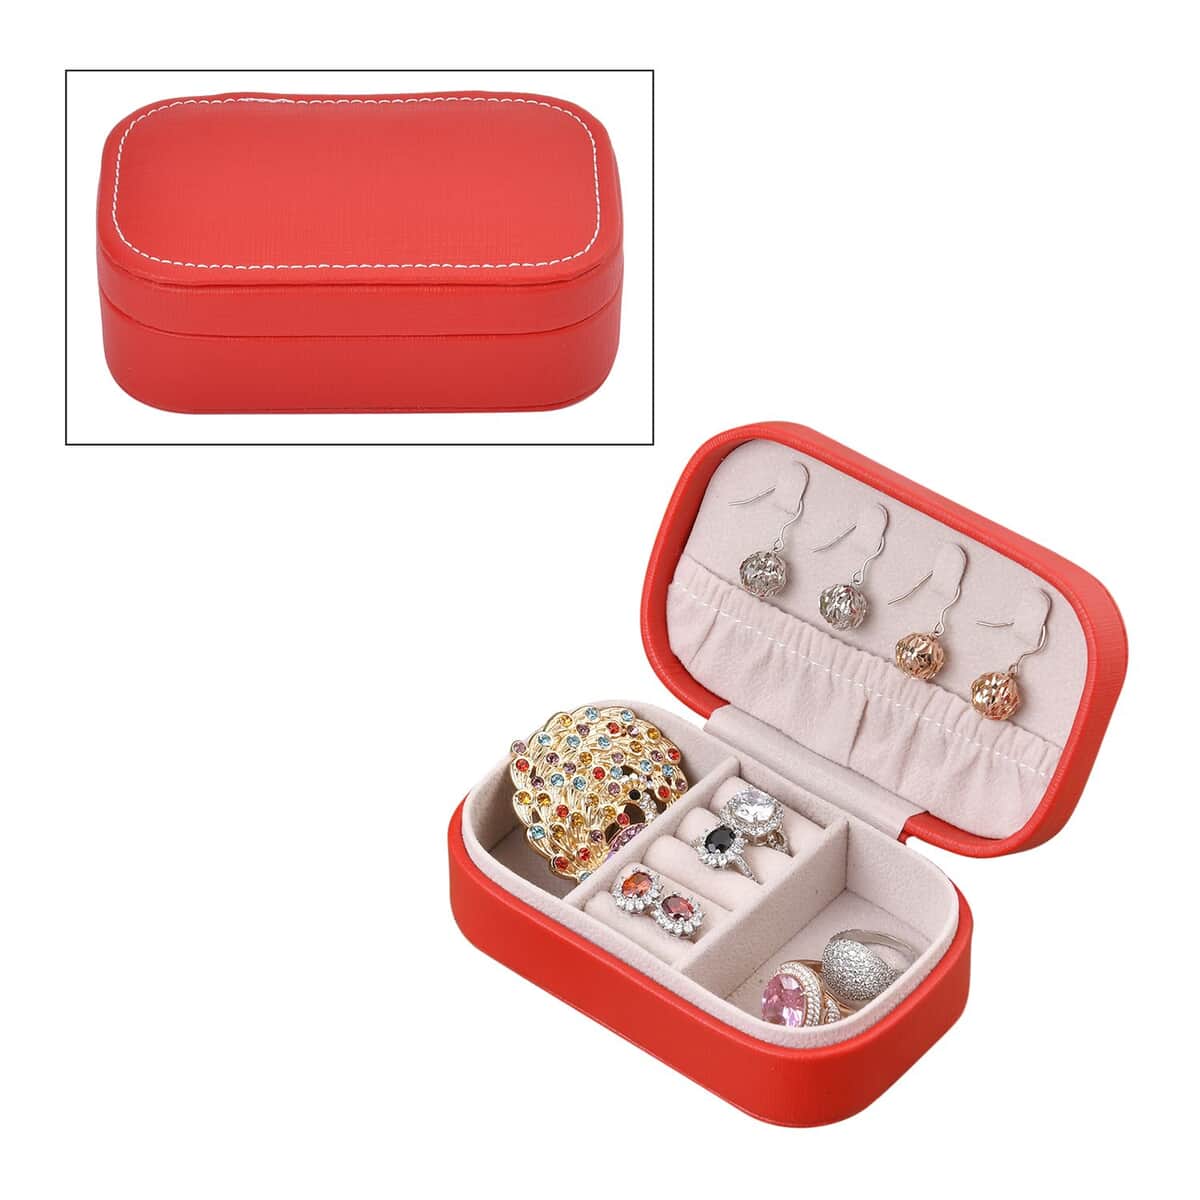 Pink Faux Leather Oval Shape Jewelry Box (4 Necklace Hooks, Pouch Pocket, 4 Ring Slot) (4.72"x3"x1.7") image number 0